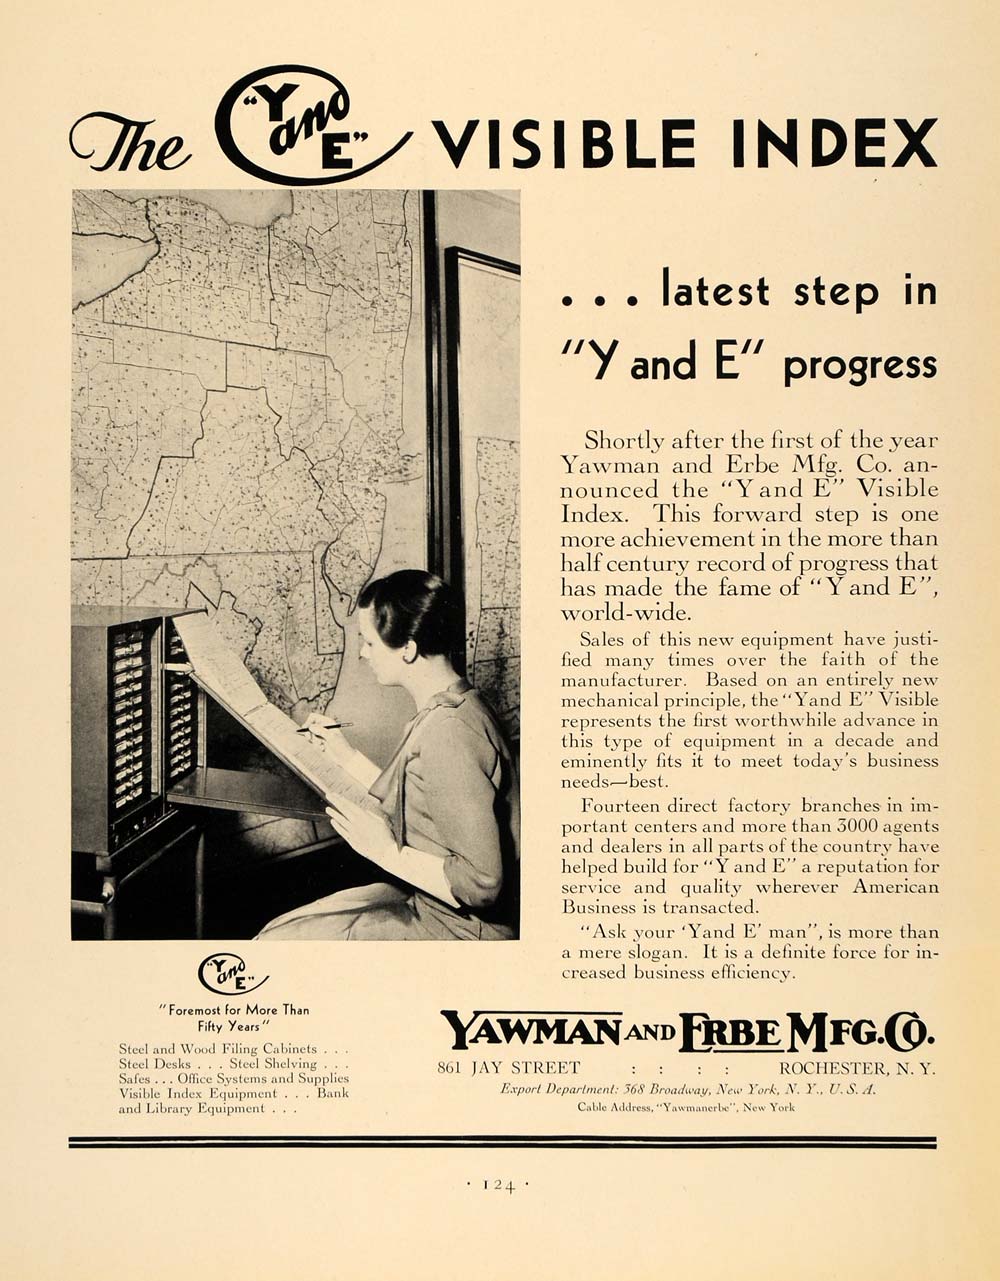 1931 Ad Yawman Erbe Office Systems Supplies 86 Jay St - ORIGINAL ADVERTISING F1A